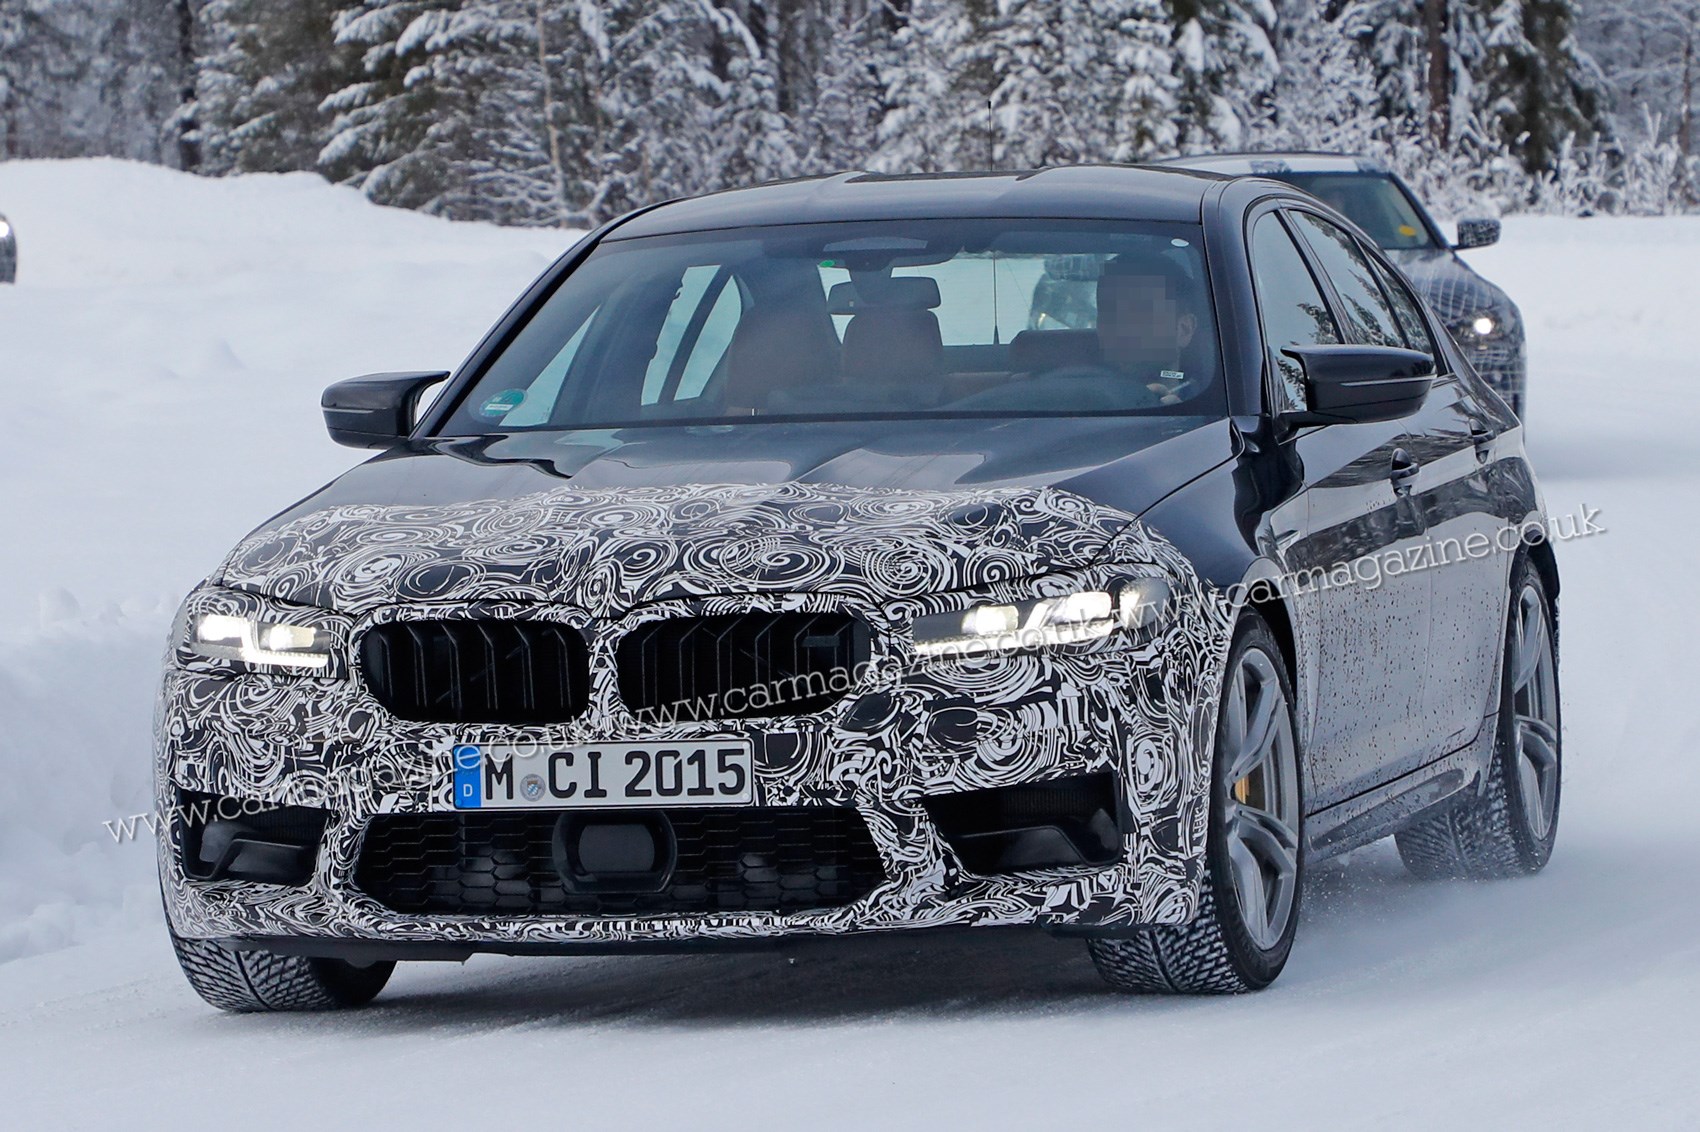 New 2024 BMW M5 fullelectric hyper saloon to have 1000bhp CAR Magazine